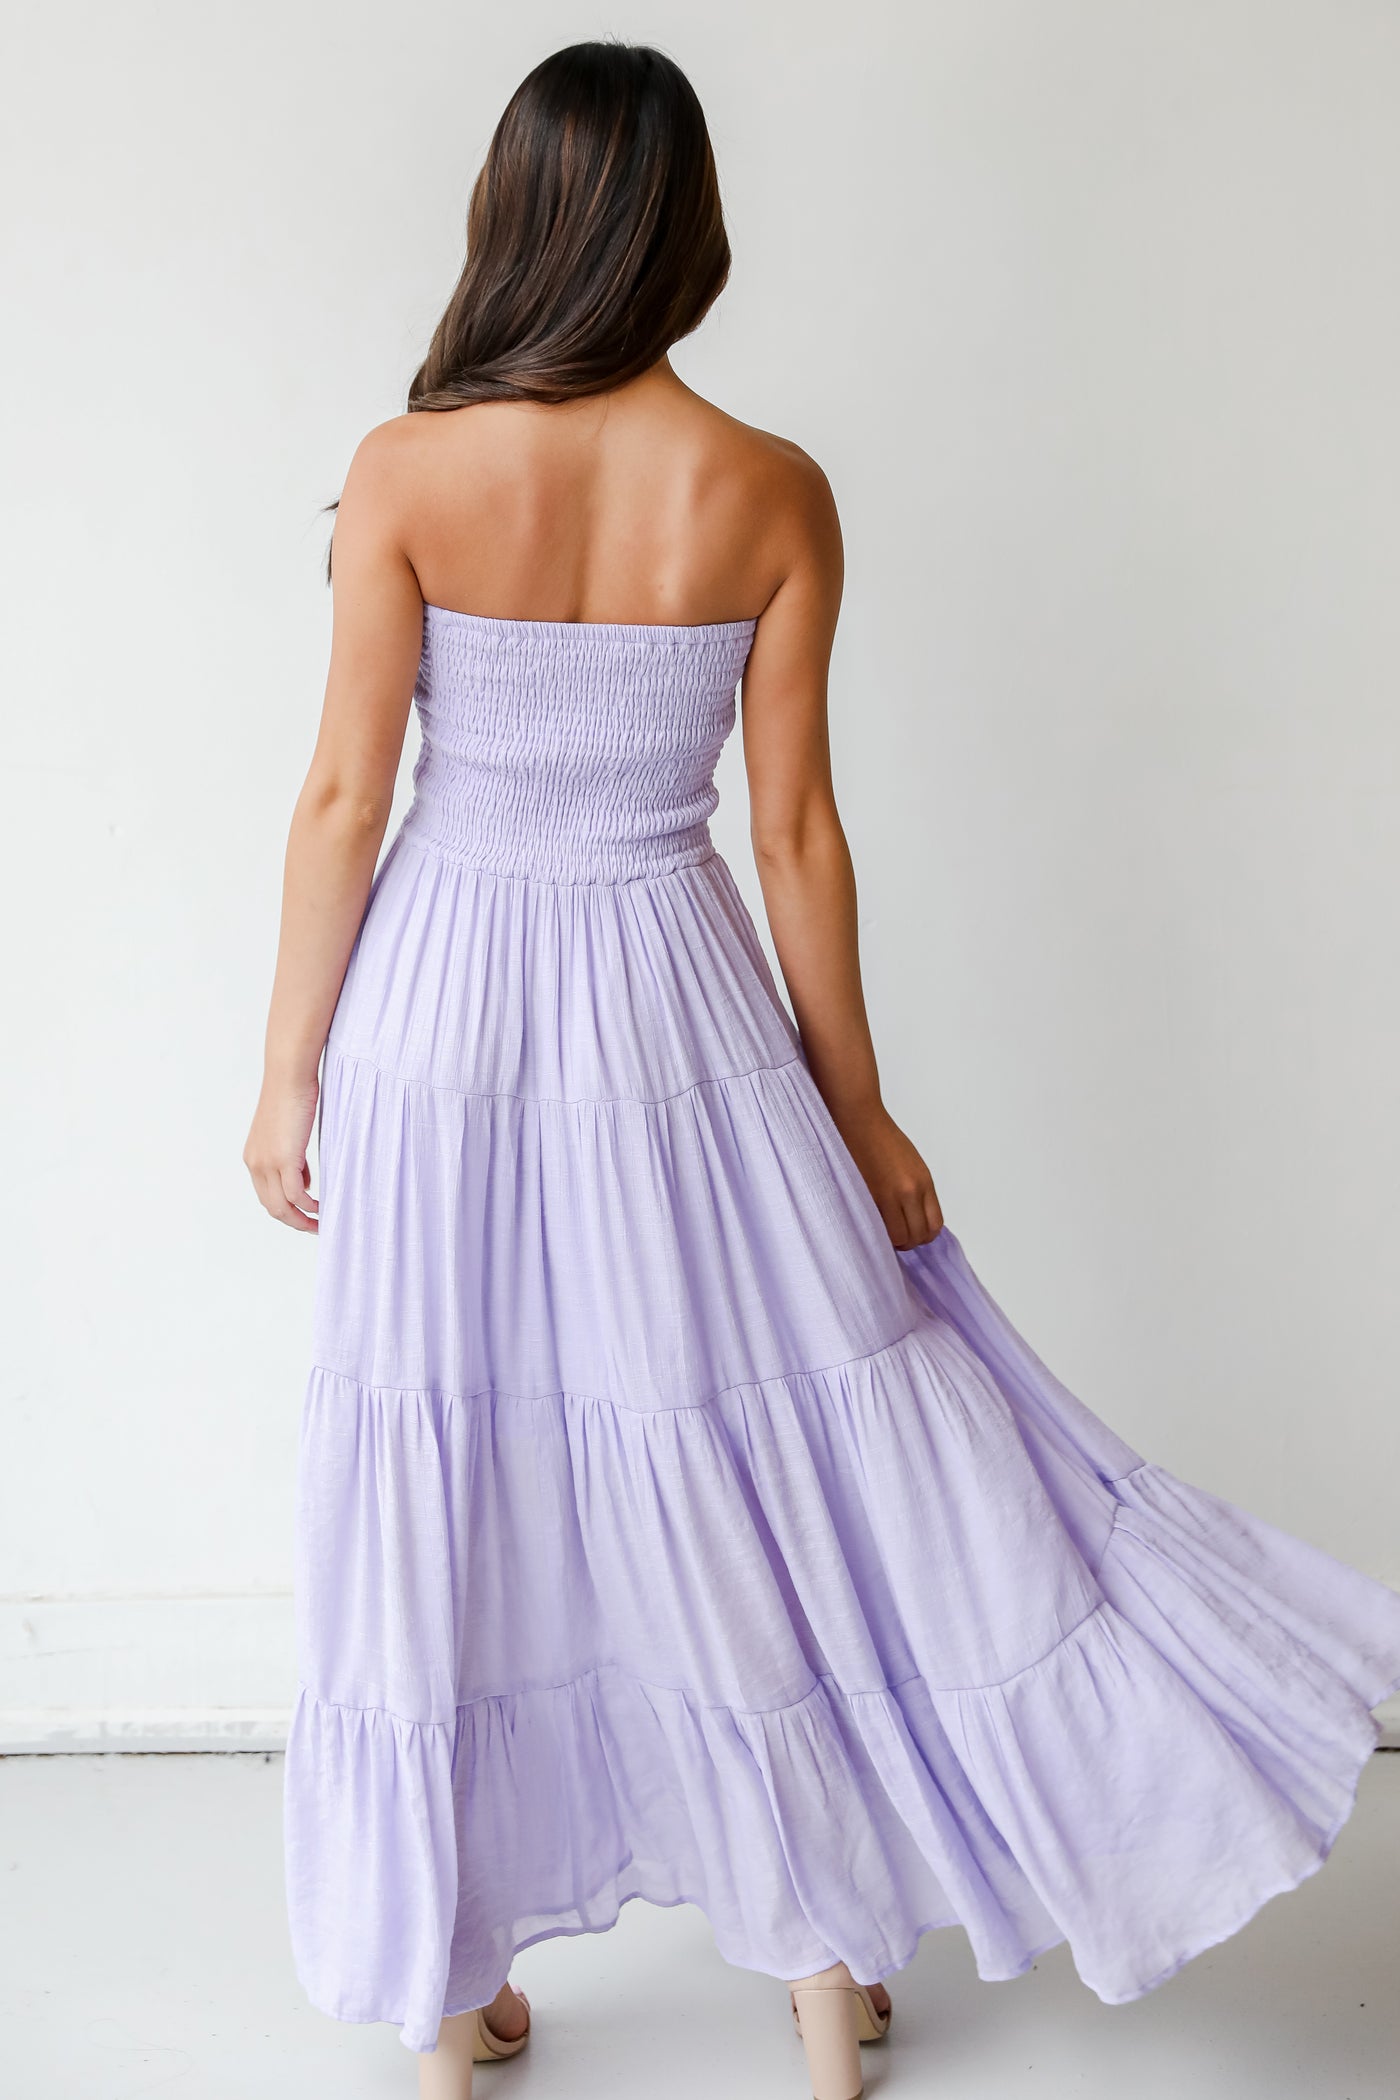 Strapless Maxi Dress in lilac back view